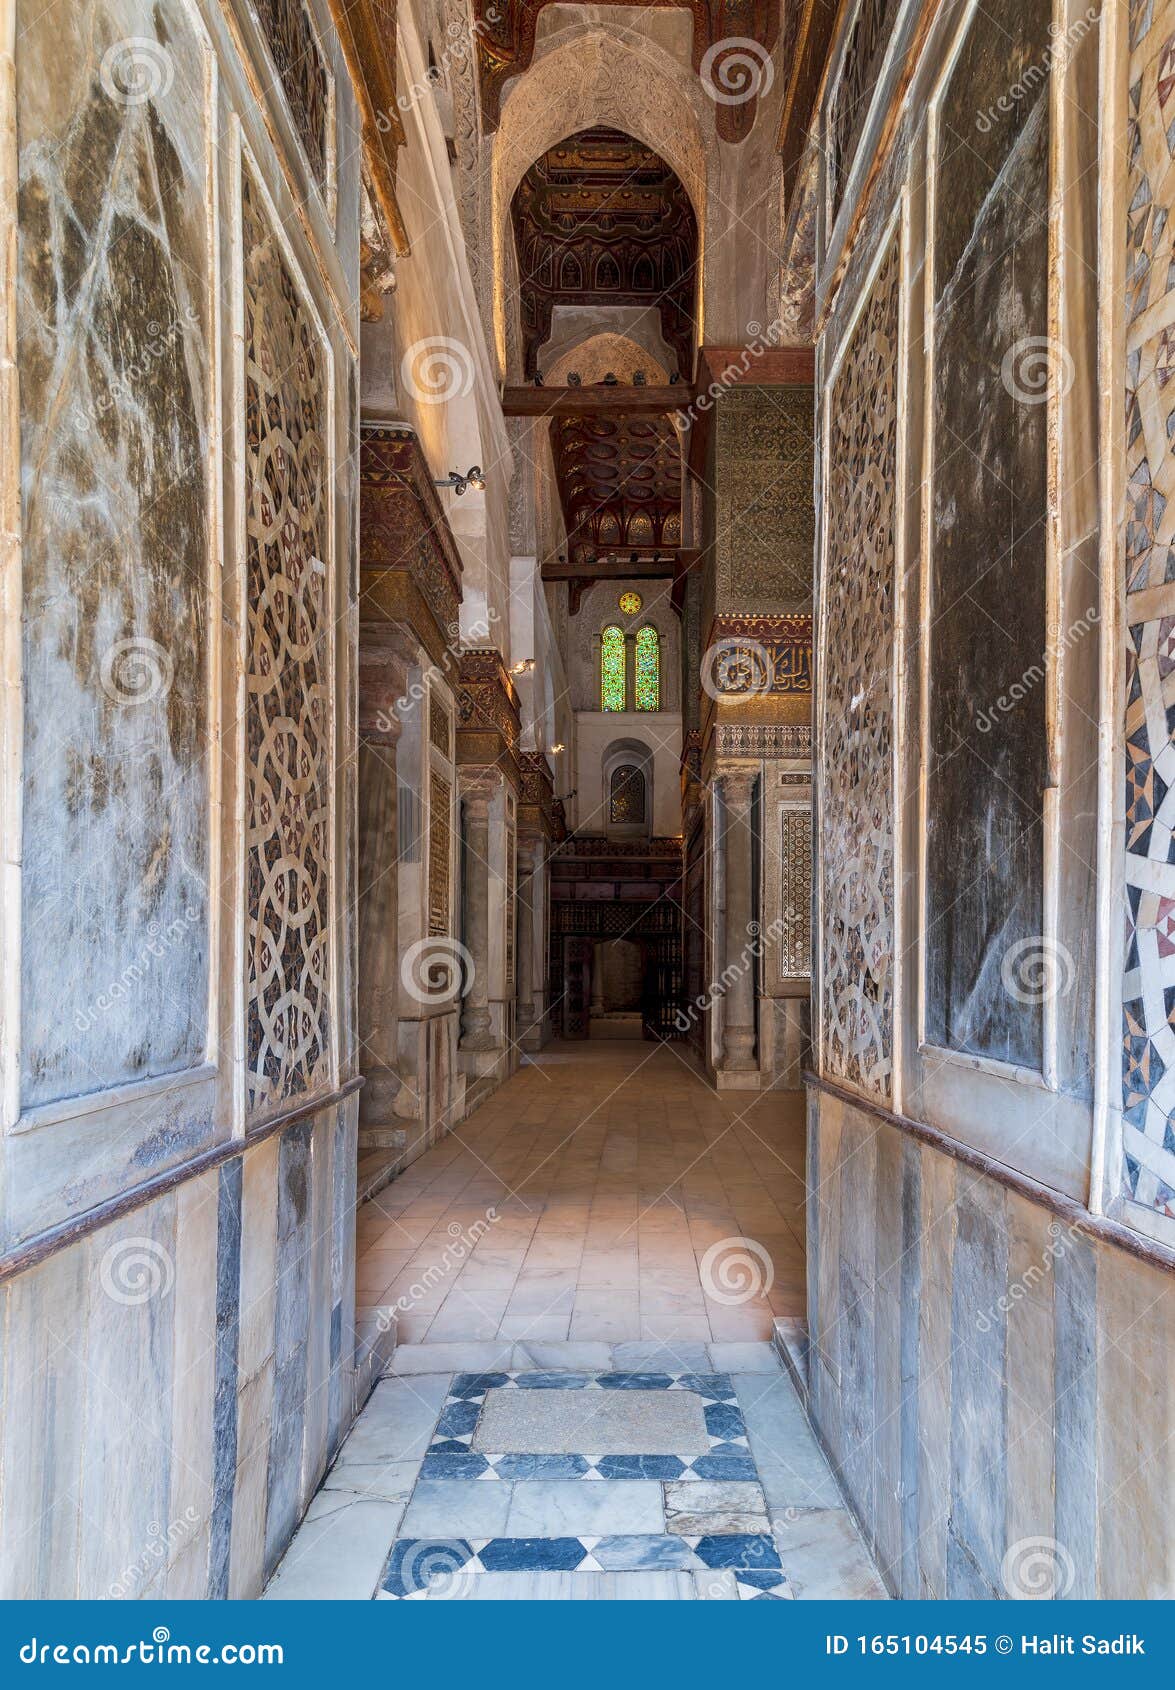 passage with decorated marble walls at the mausoleum of sultan qalawun, moez street, cairo, egypt